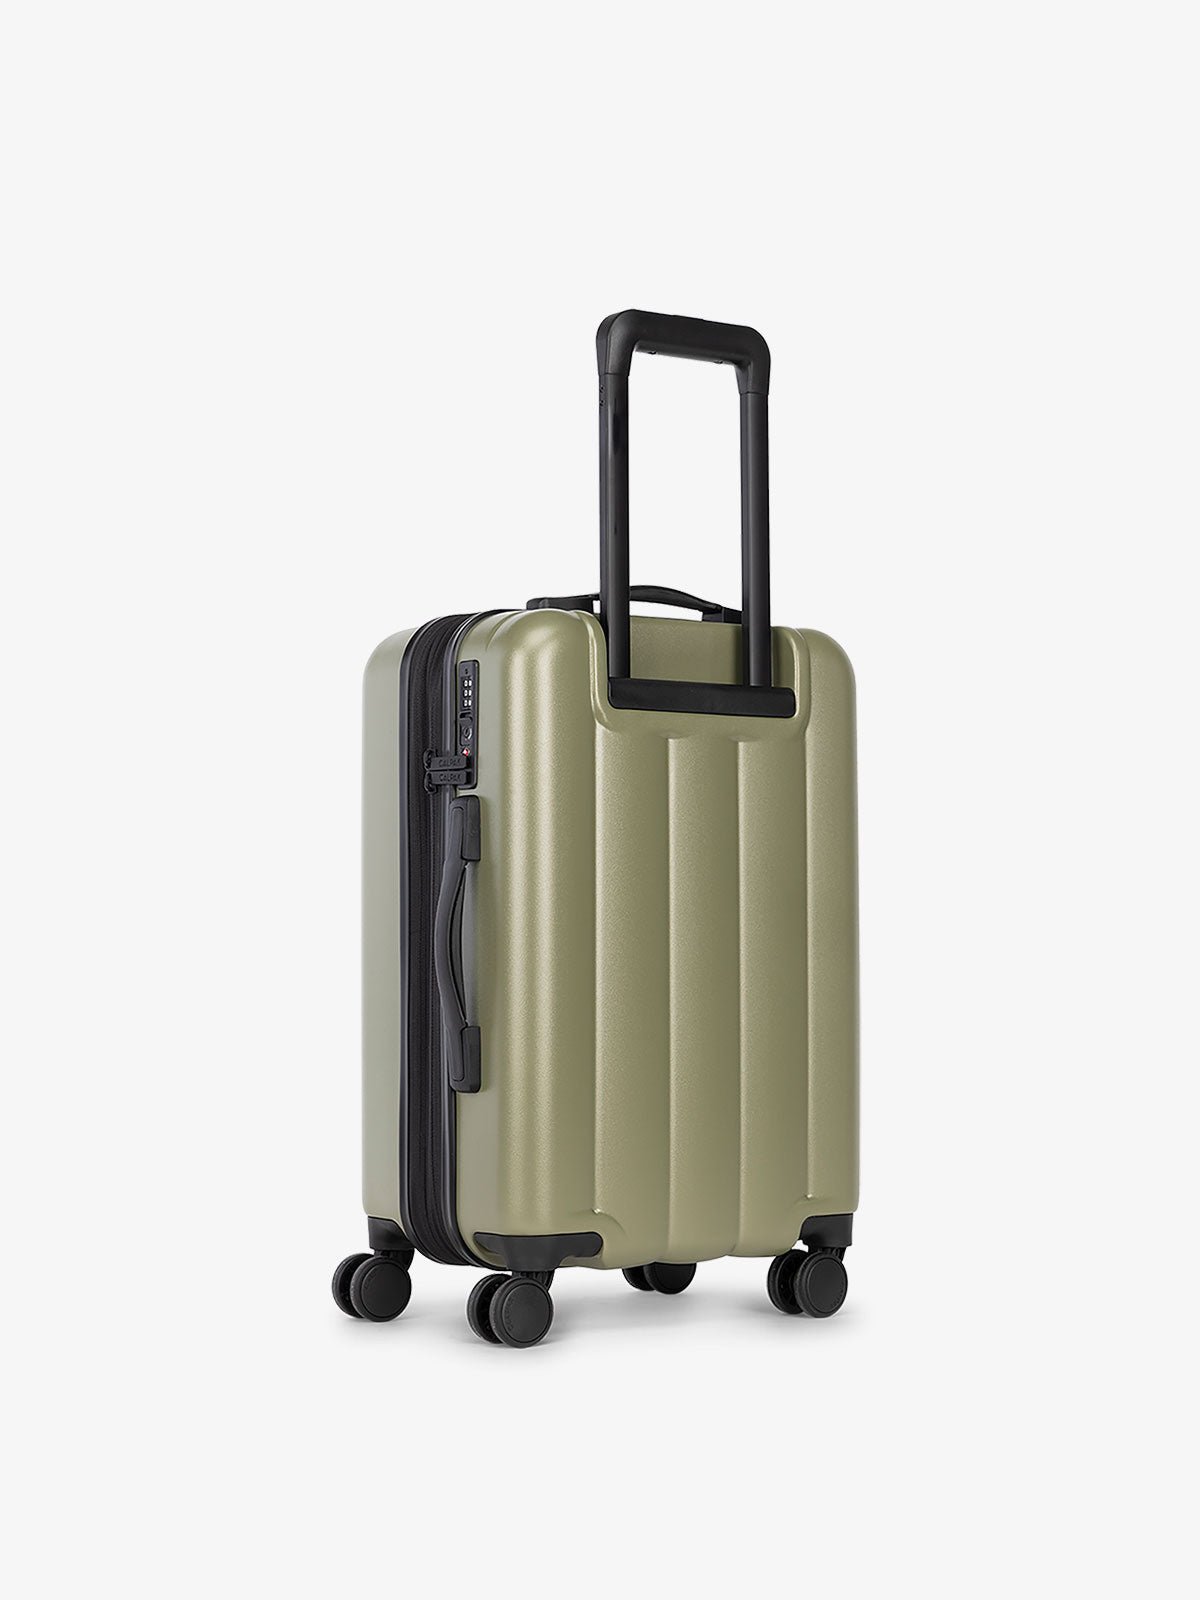 CALPAK carry-on luggage featuring dual spinner wheels and bottom grab handle